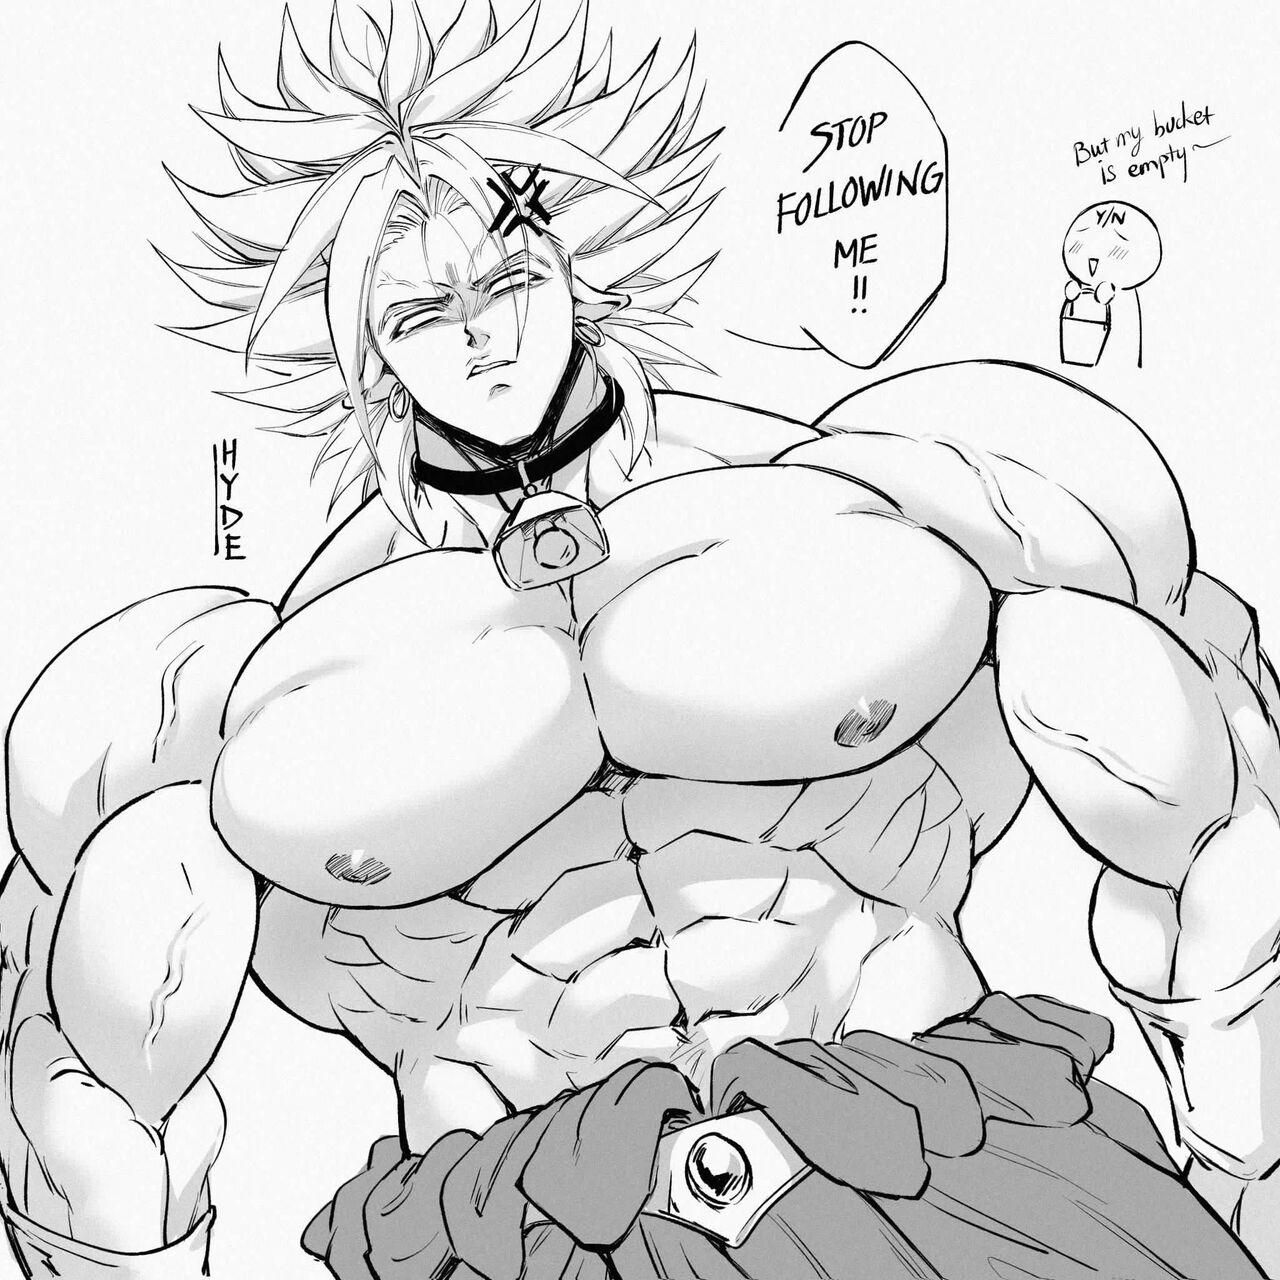 Cow broly 18